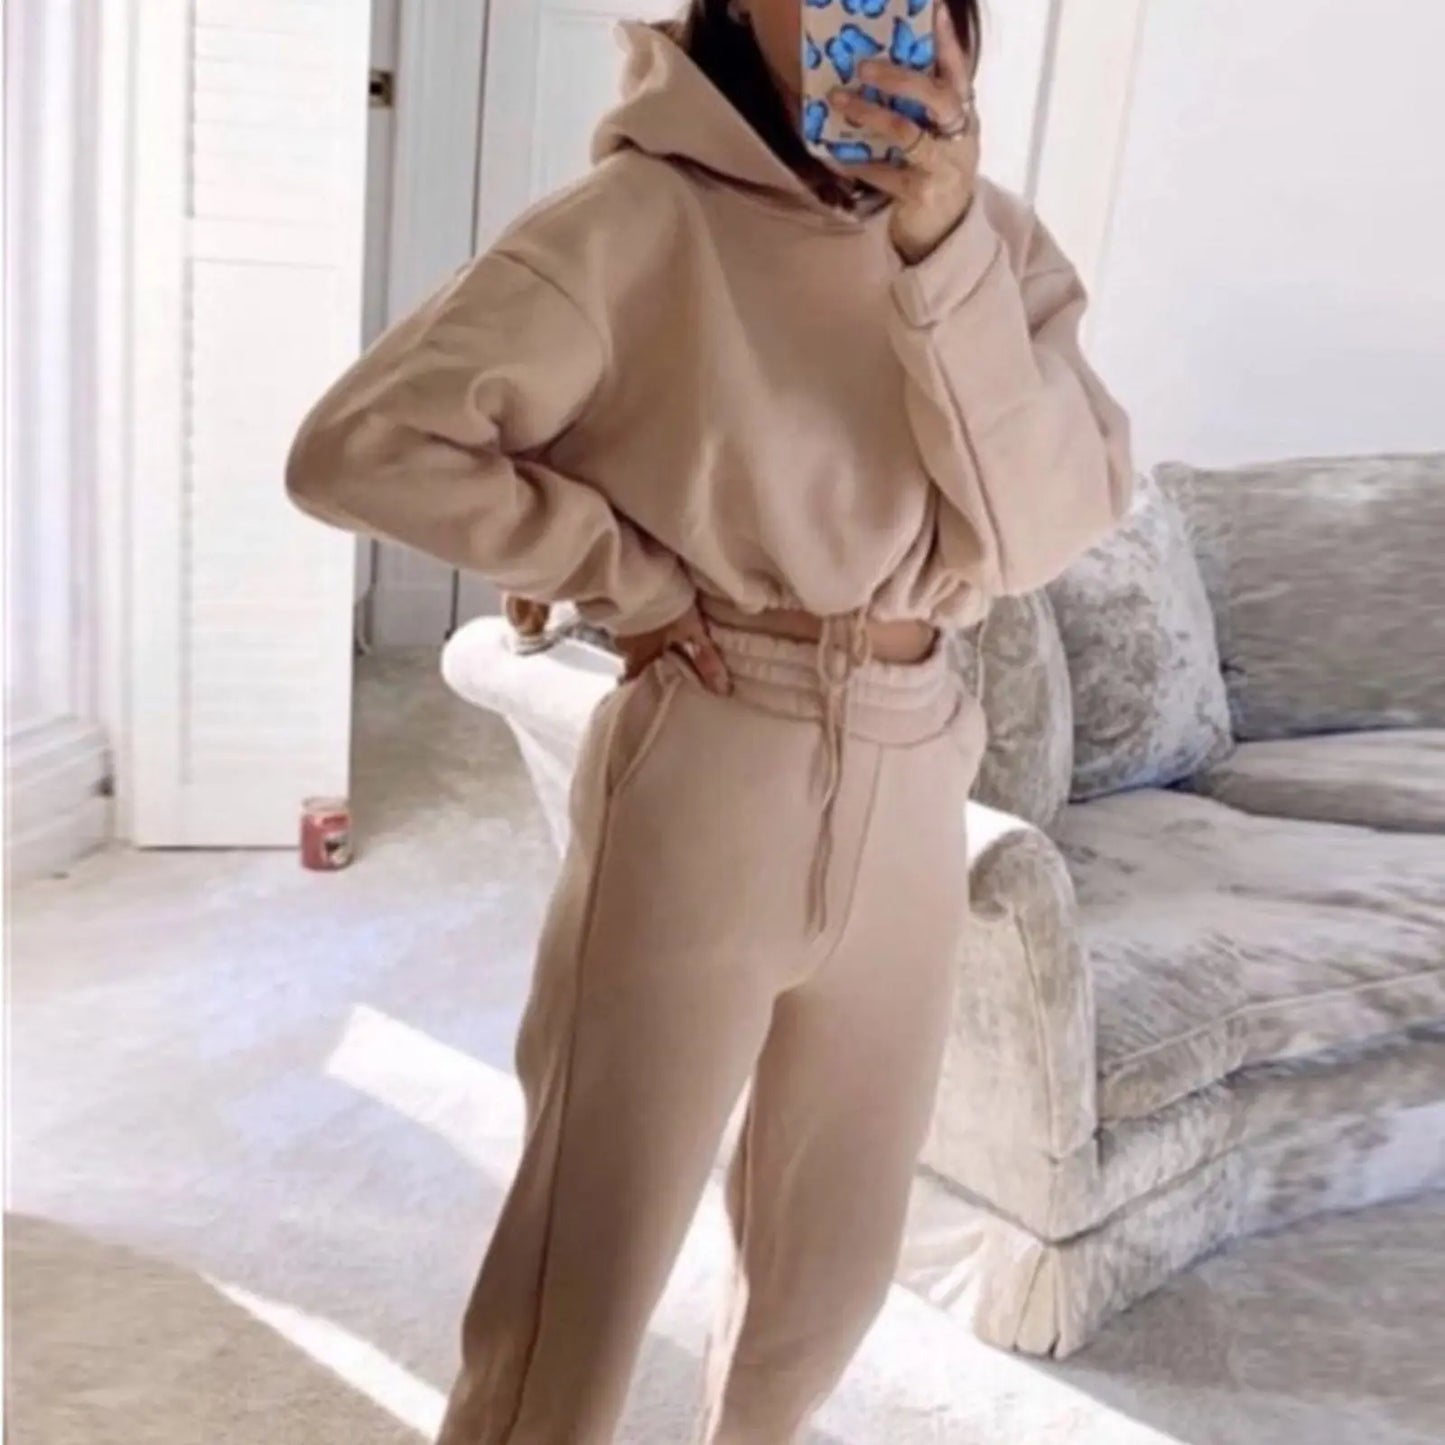 dresses  | Jogging Suits For Women 2 Piece Sweatsuits Tracksuits Sexy Long Sleeve HoodieCasual Fitness Sportswear | Khaki |  L| thecurvestory.myshopify.com